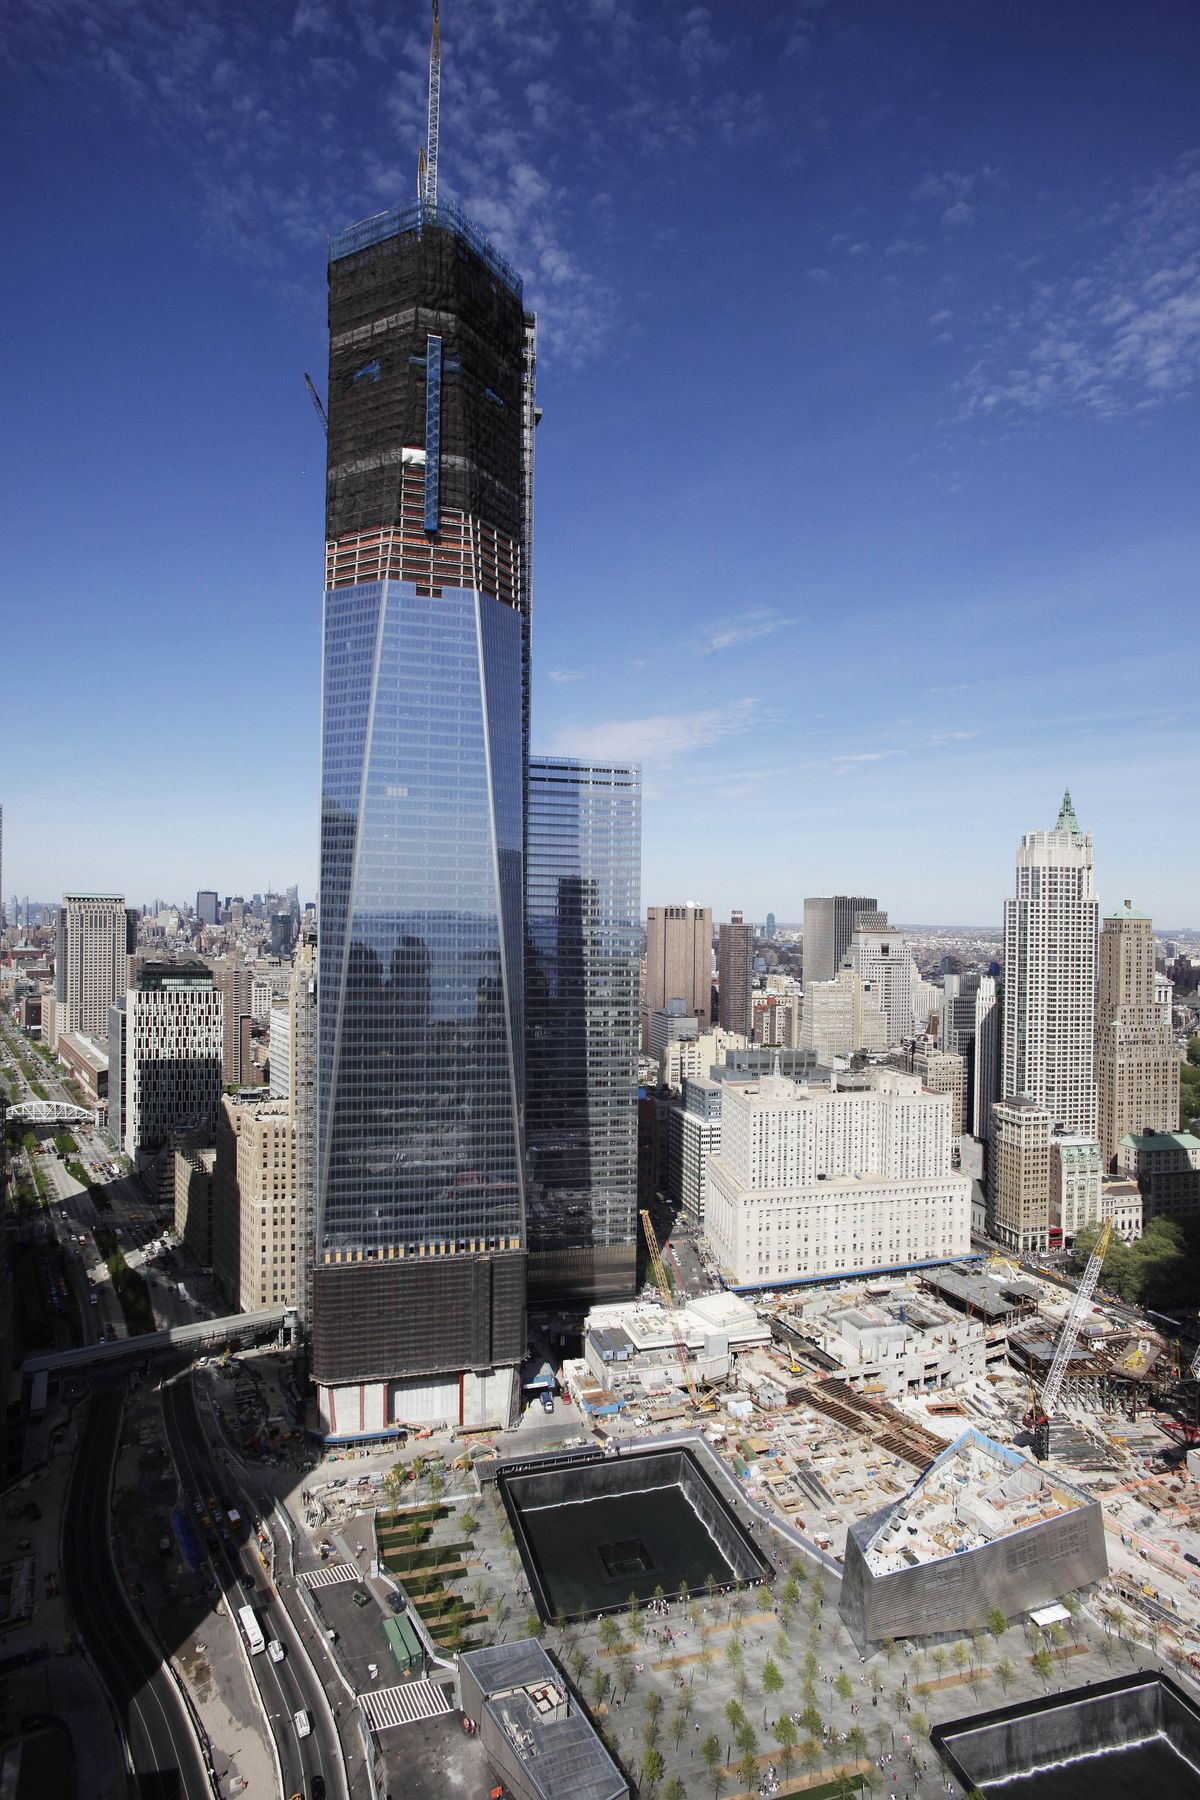 FILE- In this April 17, 2012, file photo, One World Trade Center,  rises above the lower Manhattan skyline and the National September 11 Memorial, lower right, in New York. One World Trade Center, the giant monolith being built to replace the twin towers destroyed in the Sept. 11 attacks, will lay claim to the title of New York City